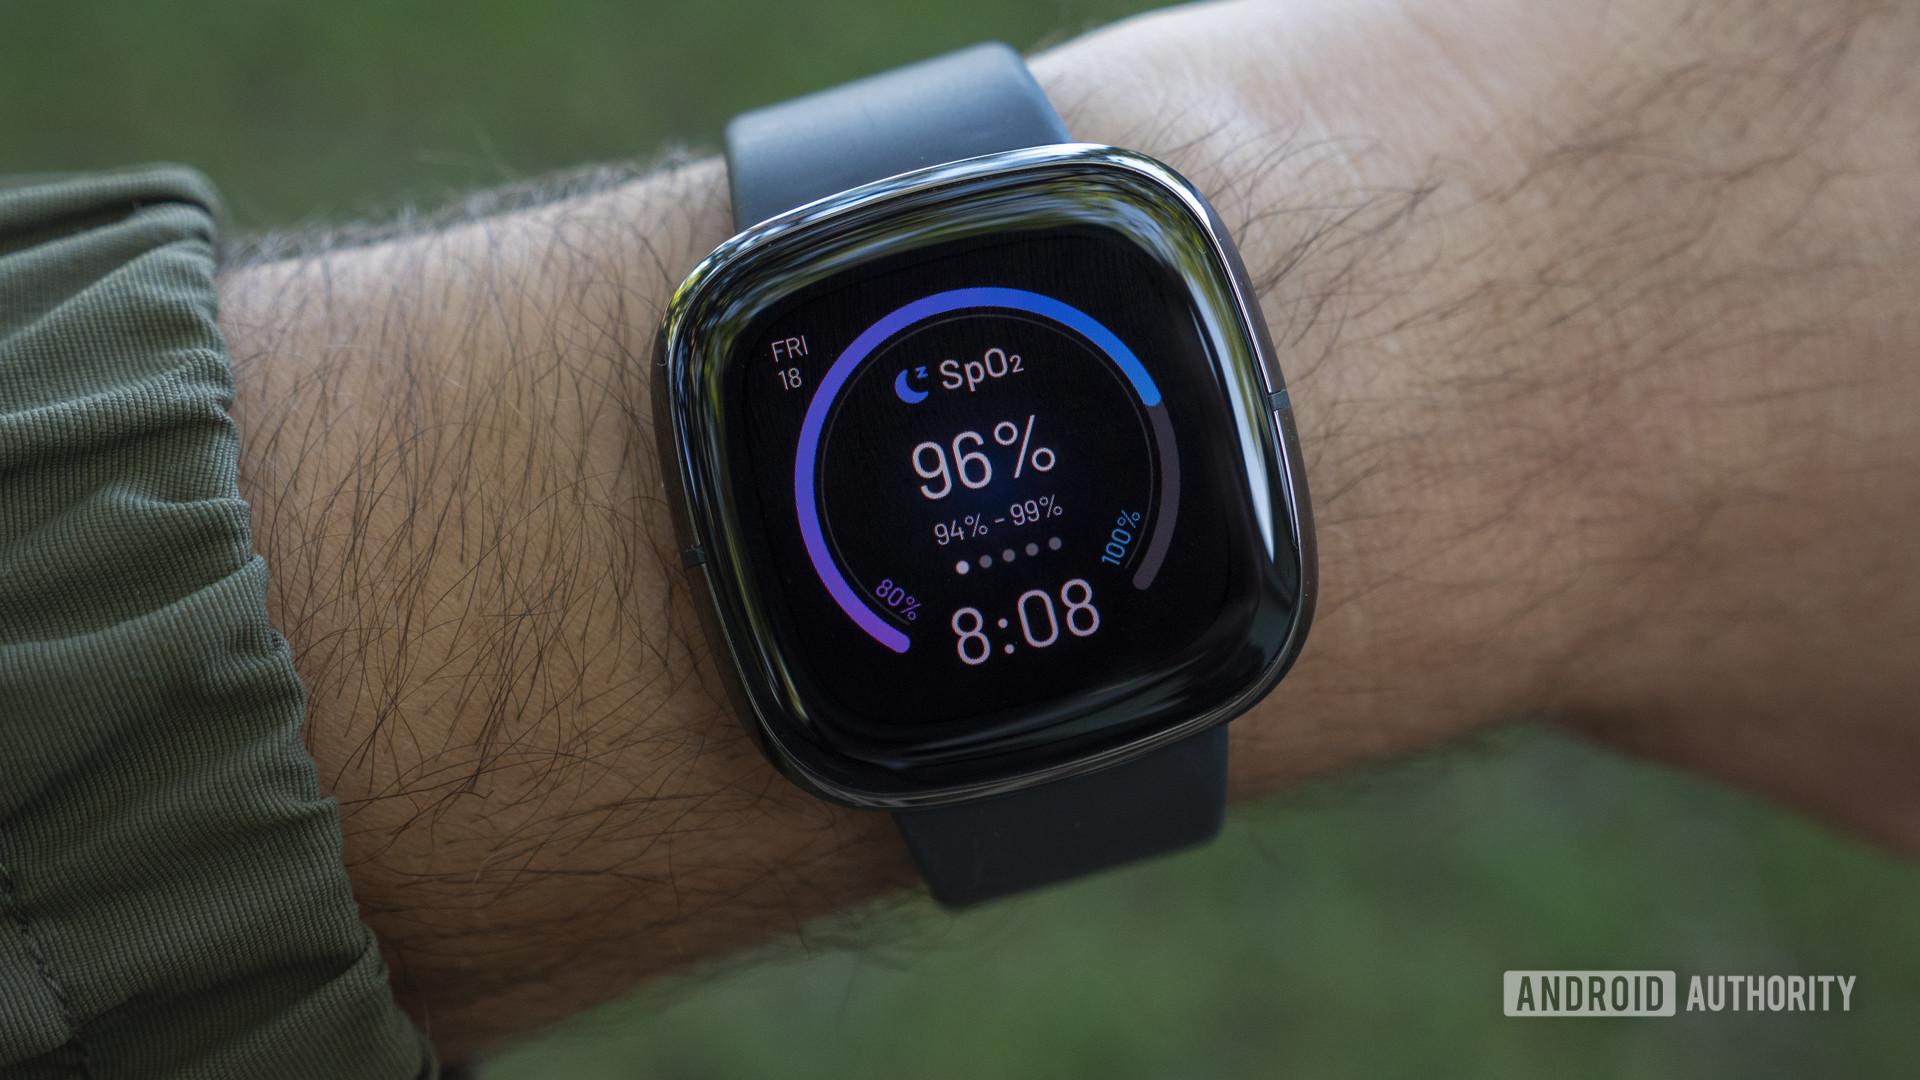 A Fitbit Sense on a man's wrist displays a watch face loaded with health stats.